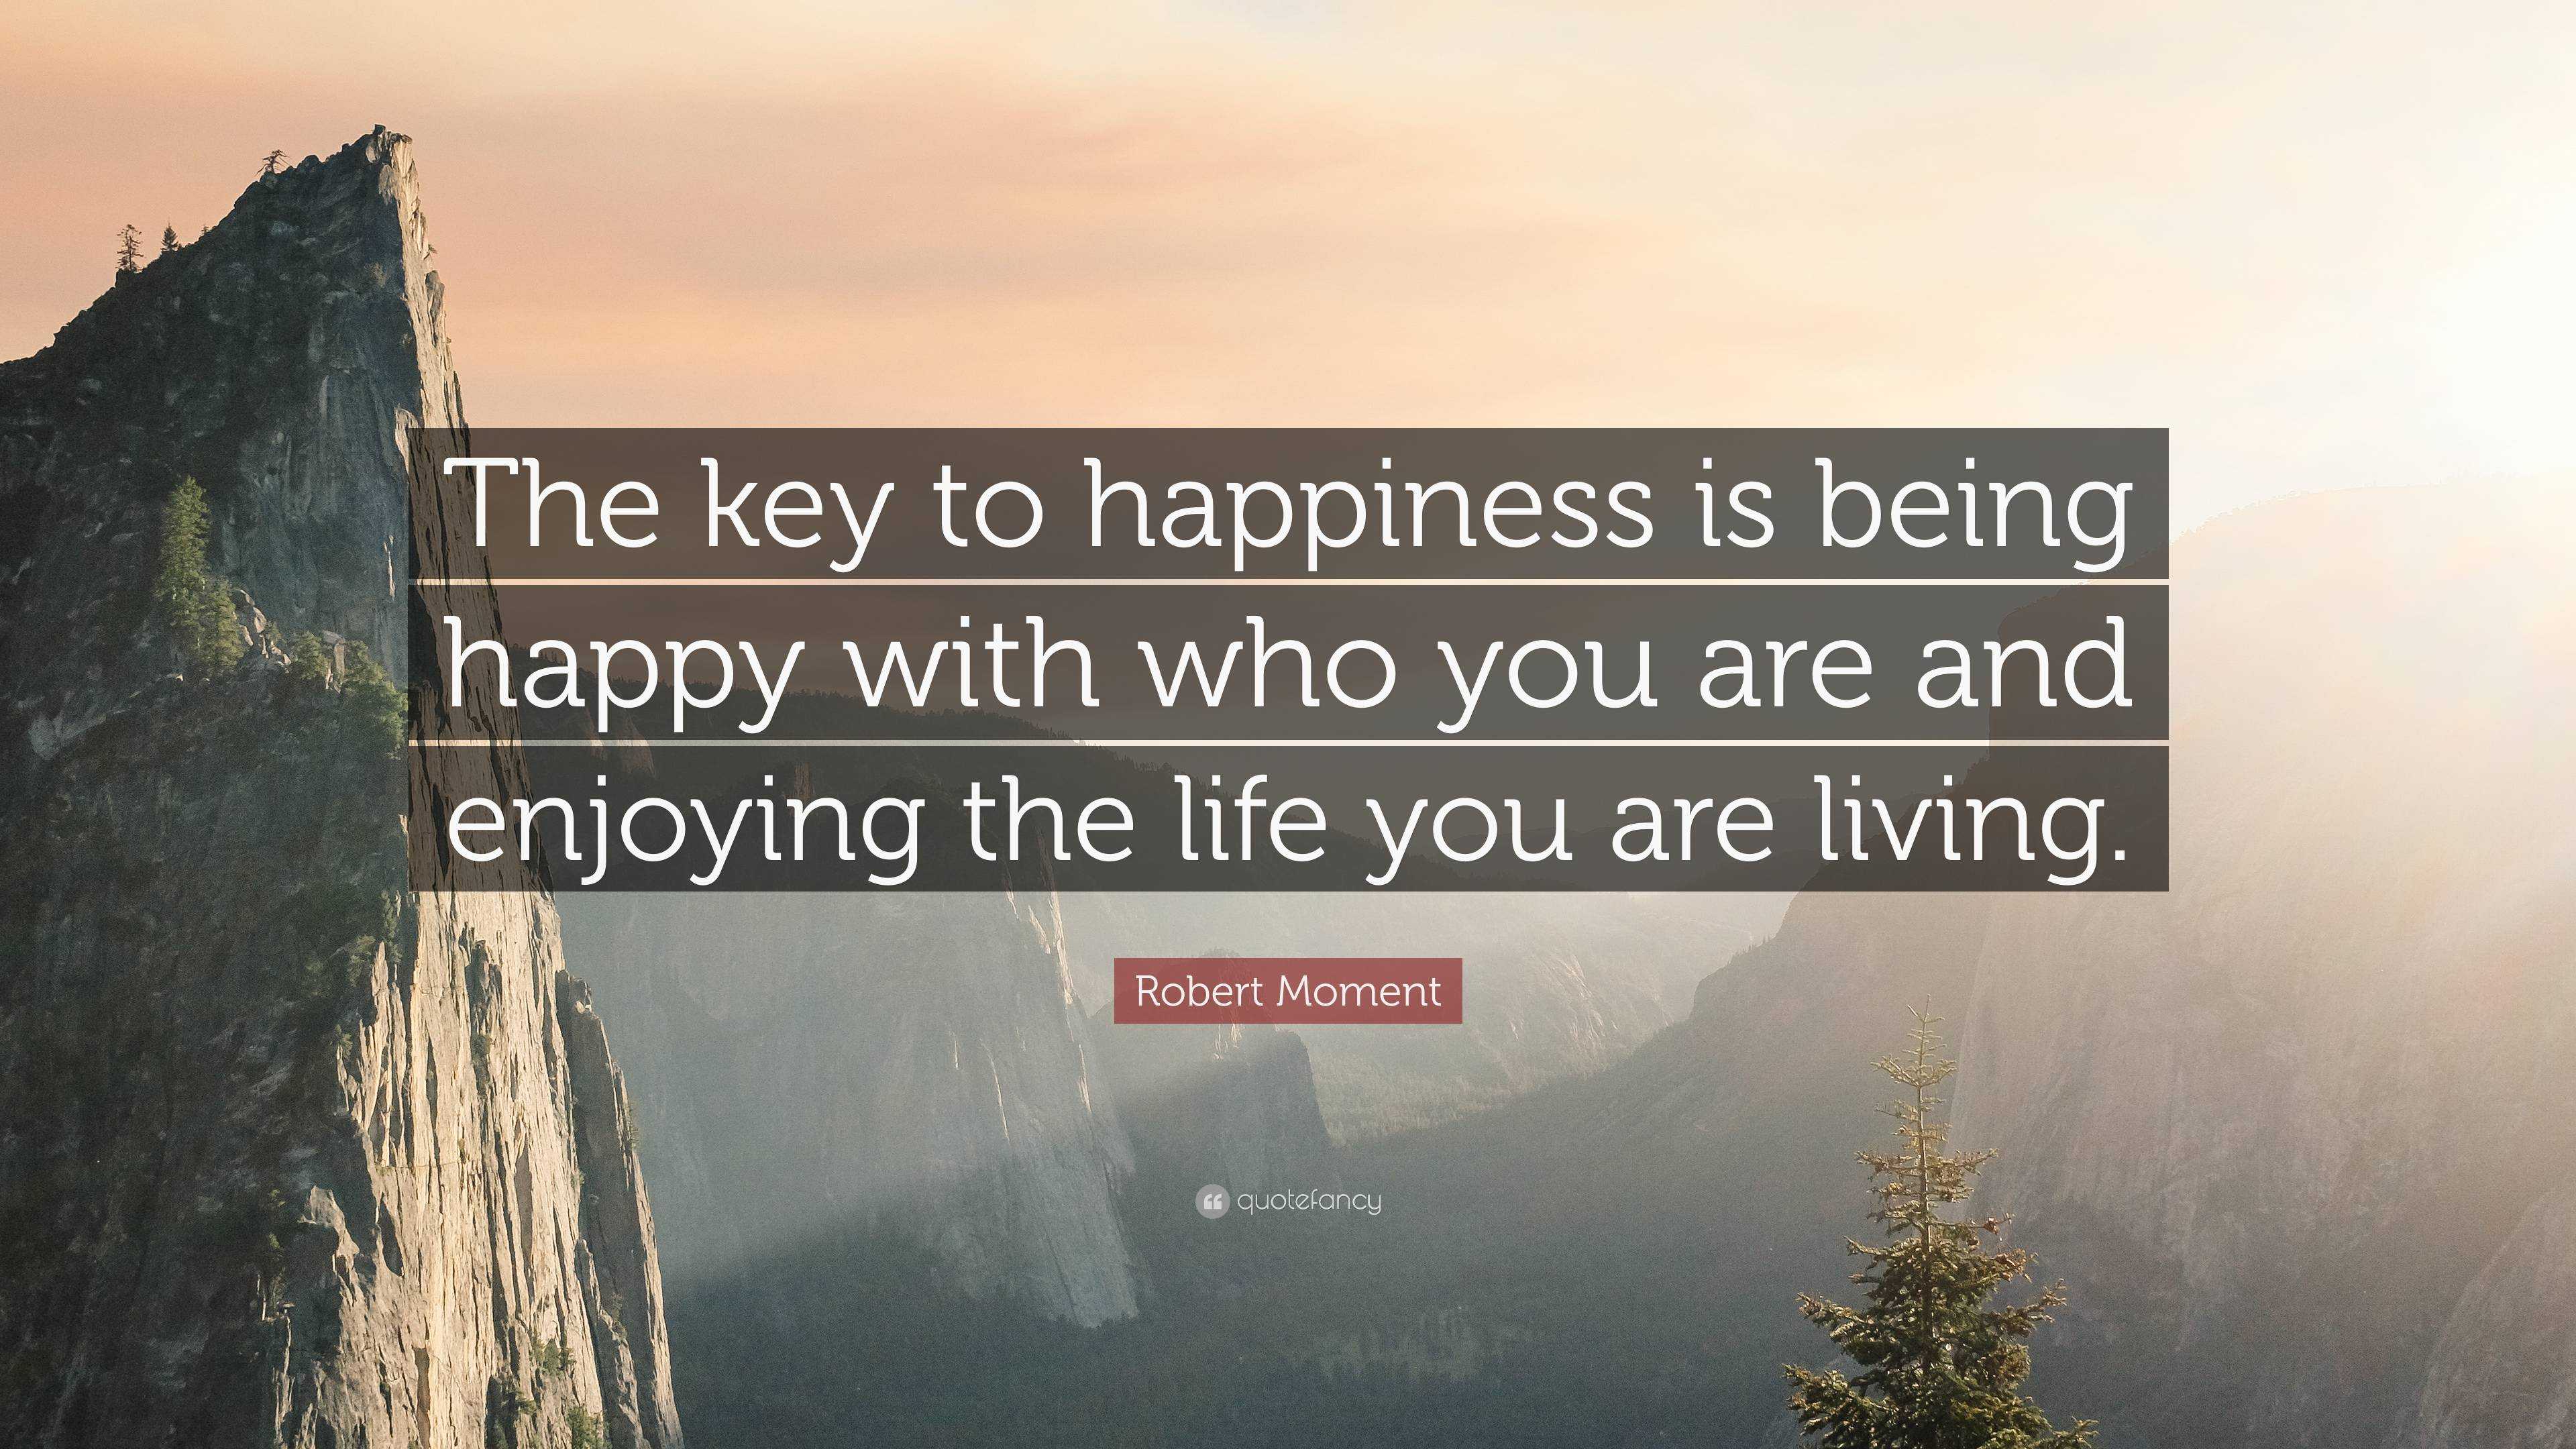 Robert Moment Quote: “The key to happiness is being happy with who you are  and enjoying